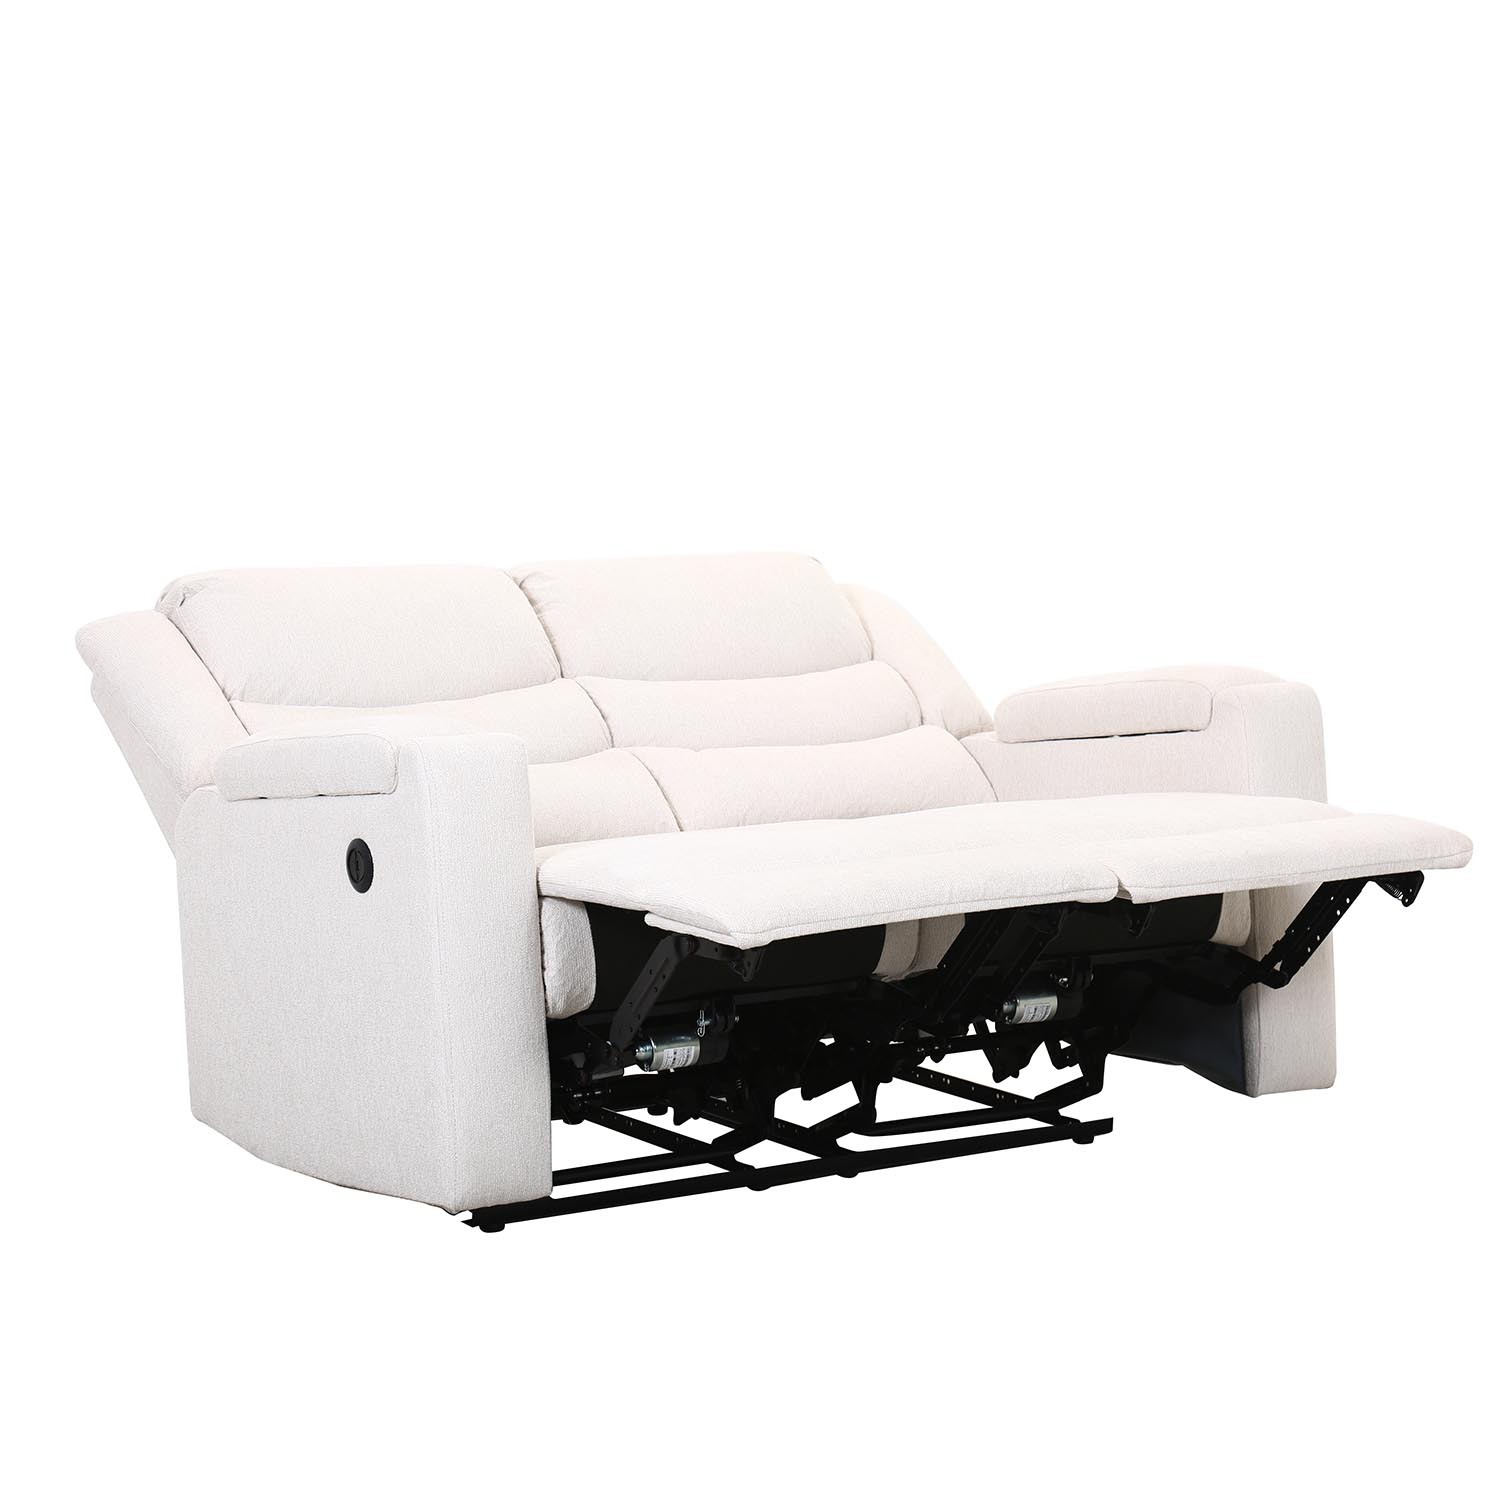 Heritage 2 Seater Ivory Recliner Sofa Image 5